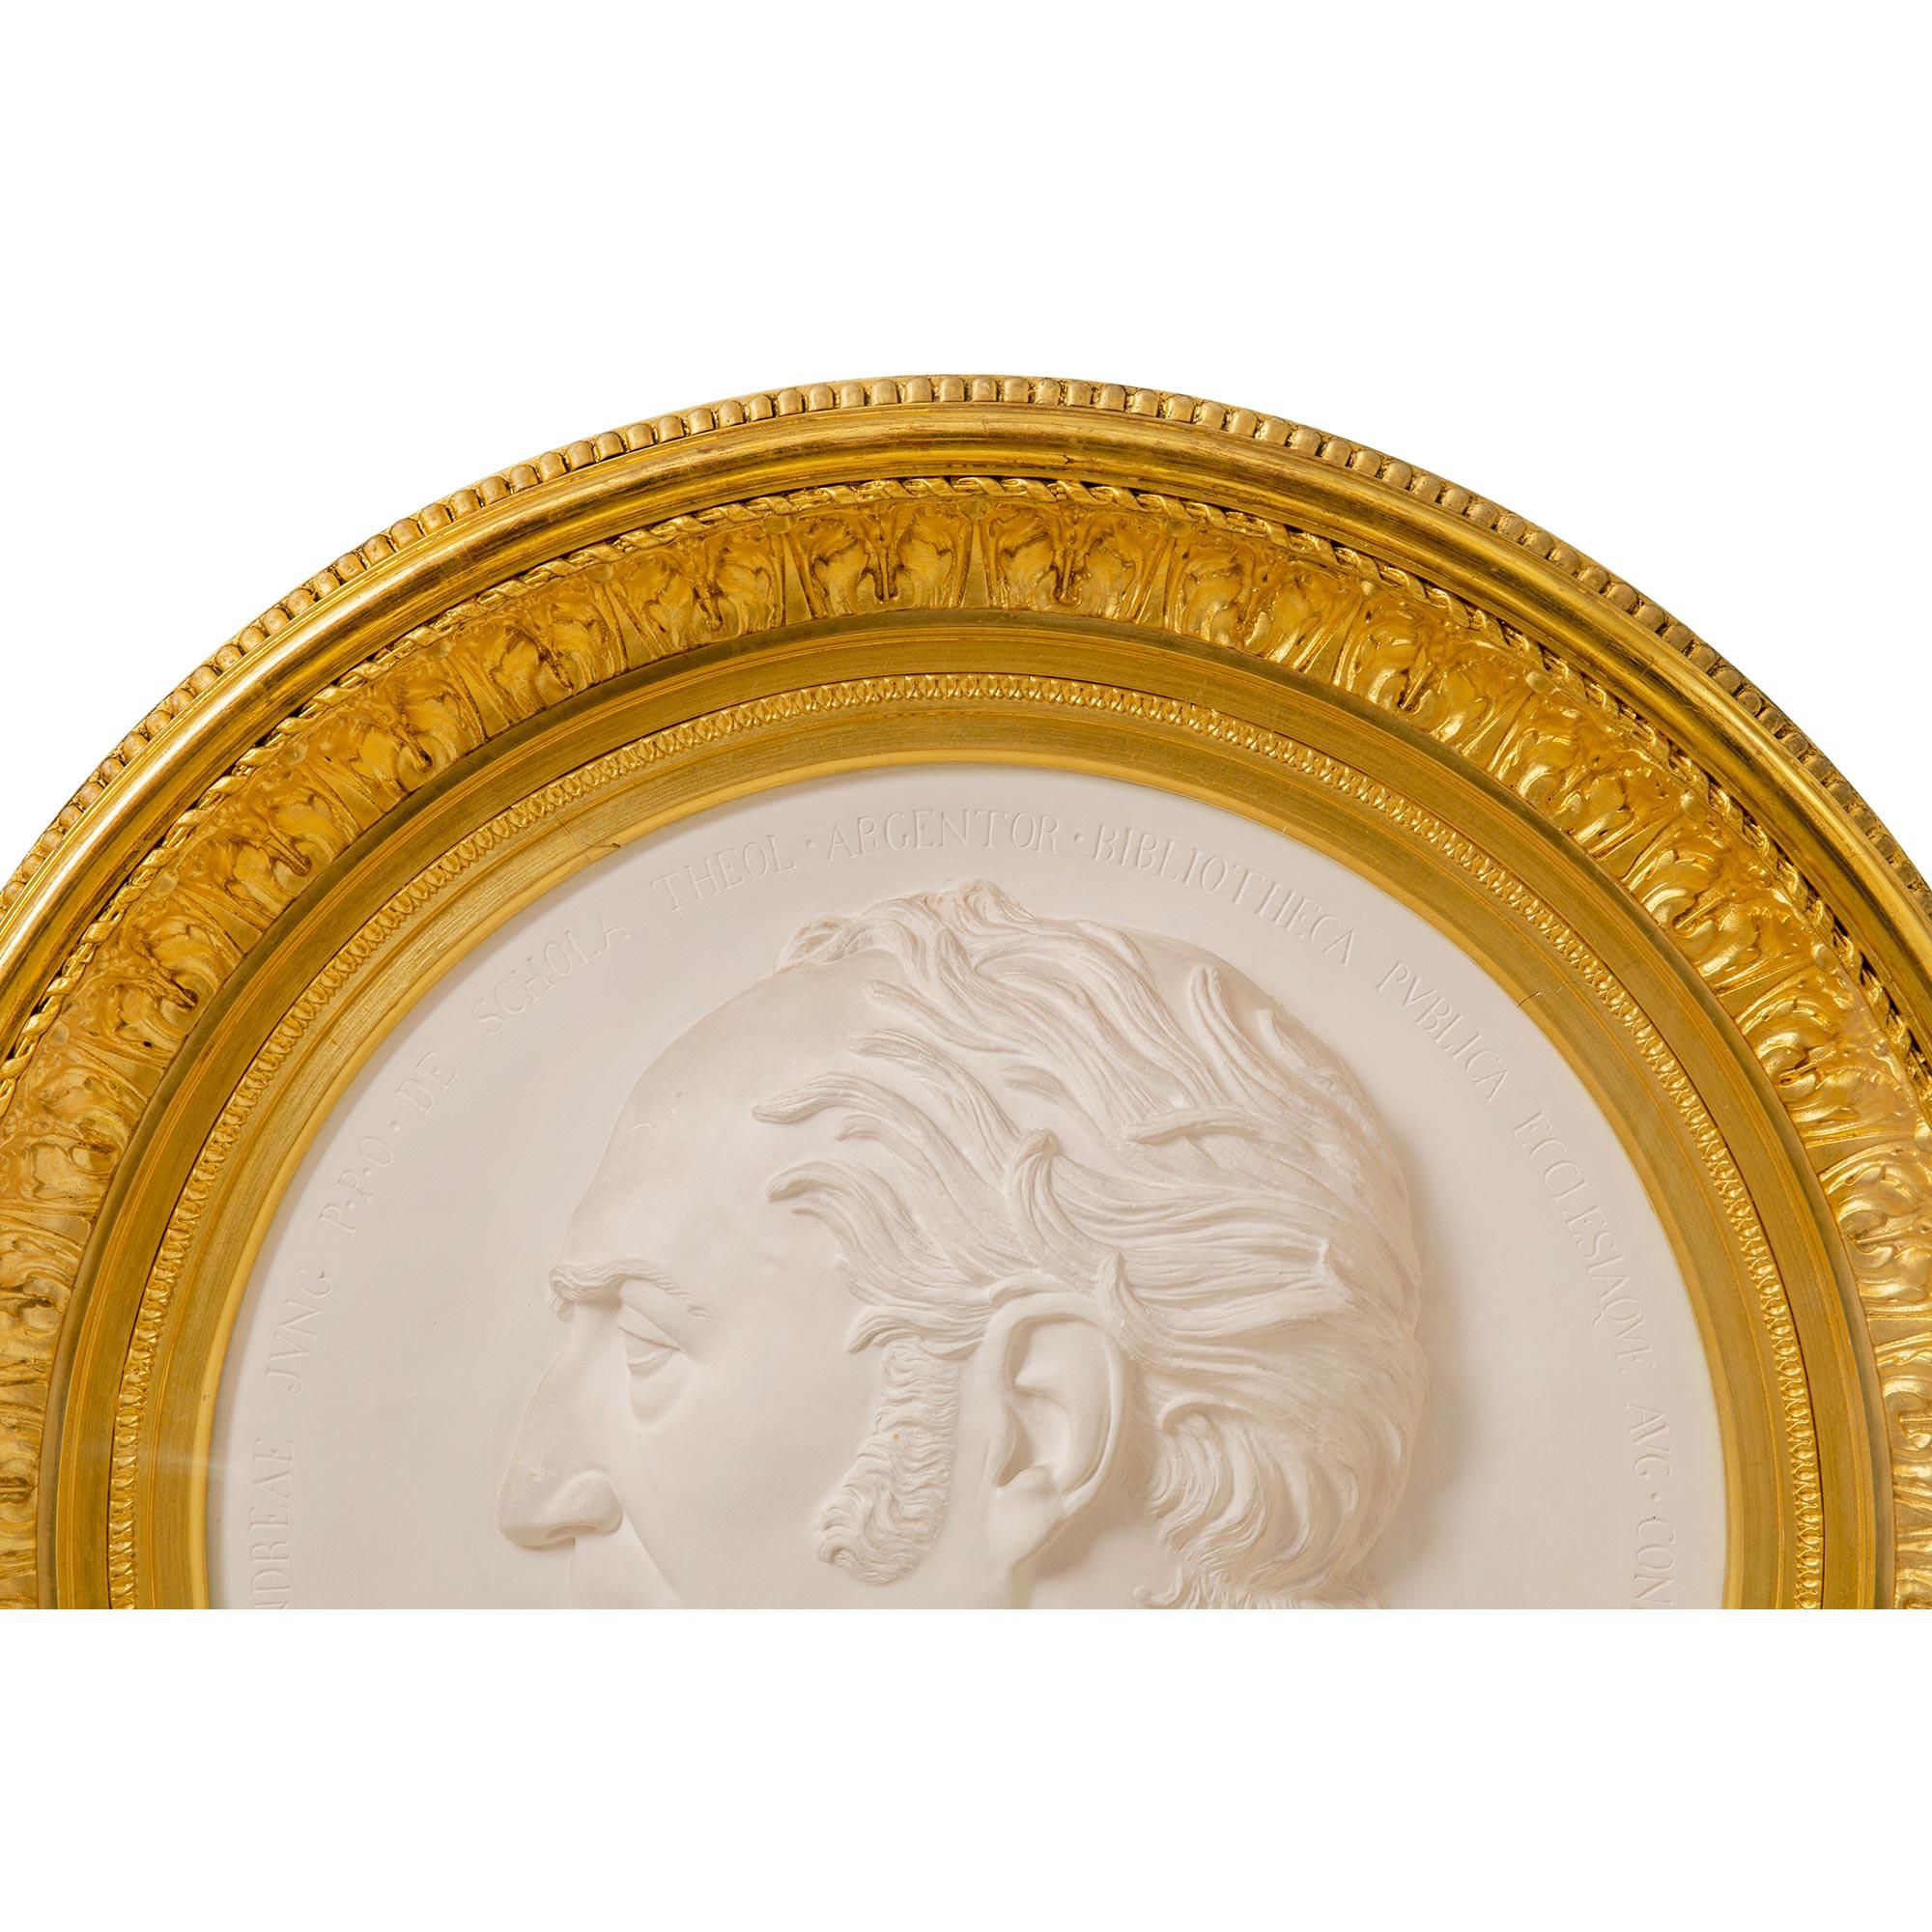 Italian 19th Century Louis XVI Style Giltwood and Plaster Wall Plaque In Good Condition For Sale In West Palm Beach, FL